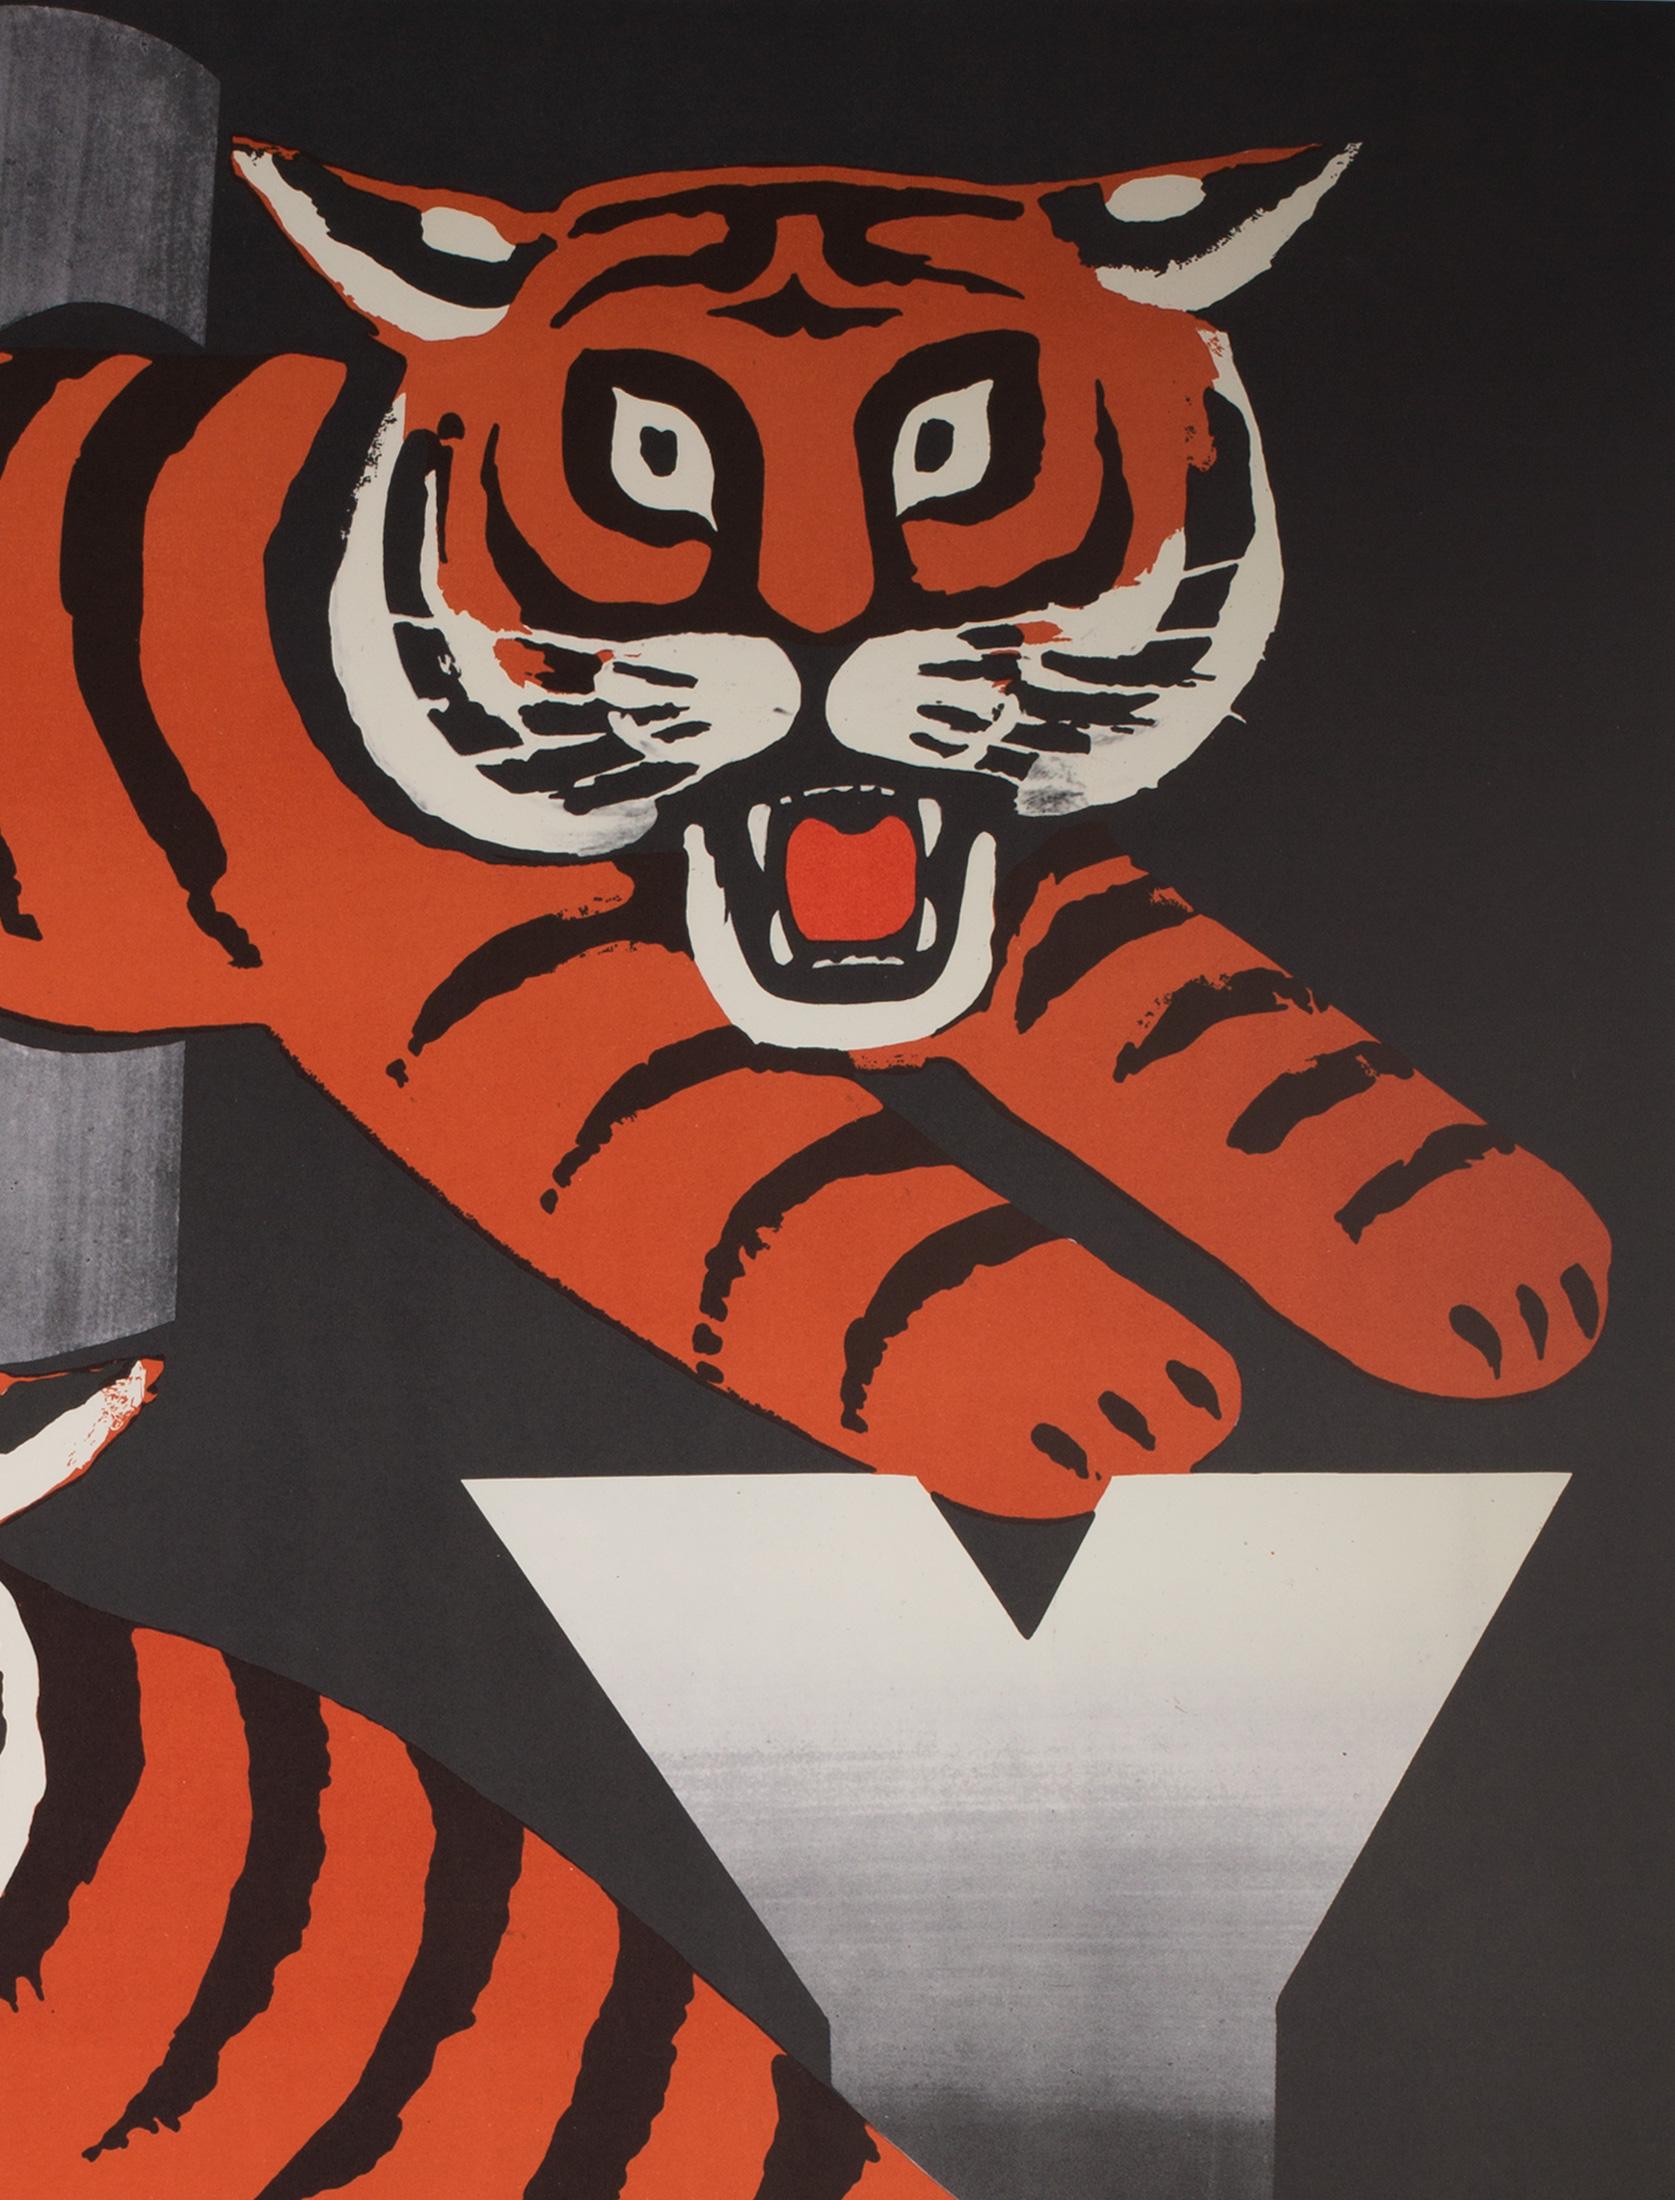 Original Polish CRYK (circus) poster from 1973 featuring a fabulous Two Tigers design by Wiktor Gorka, one of Poland's most celebrated poster artists. Gorka's design is, as with much of his work, cool, clean-cut and contemporary.
This very rare